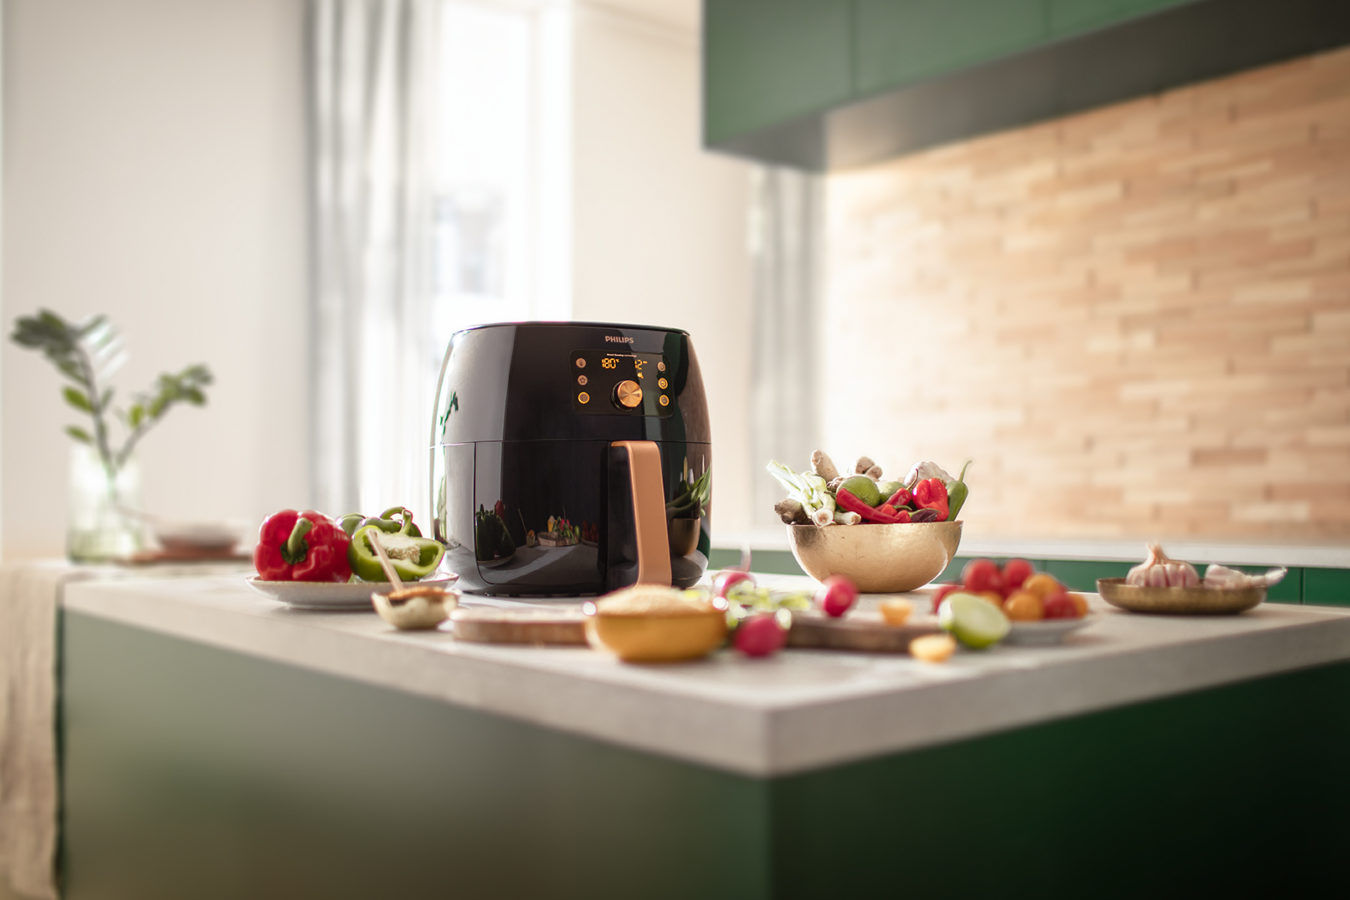 Here's why everyone needs a Philips Airfryer XXL with Smart